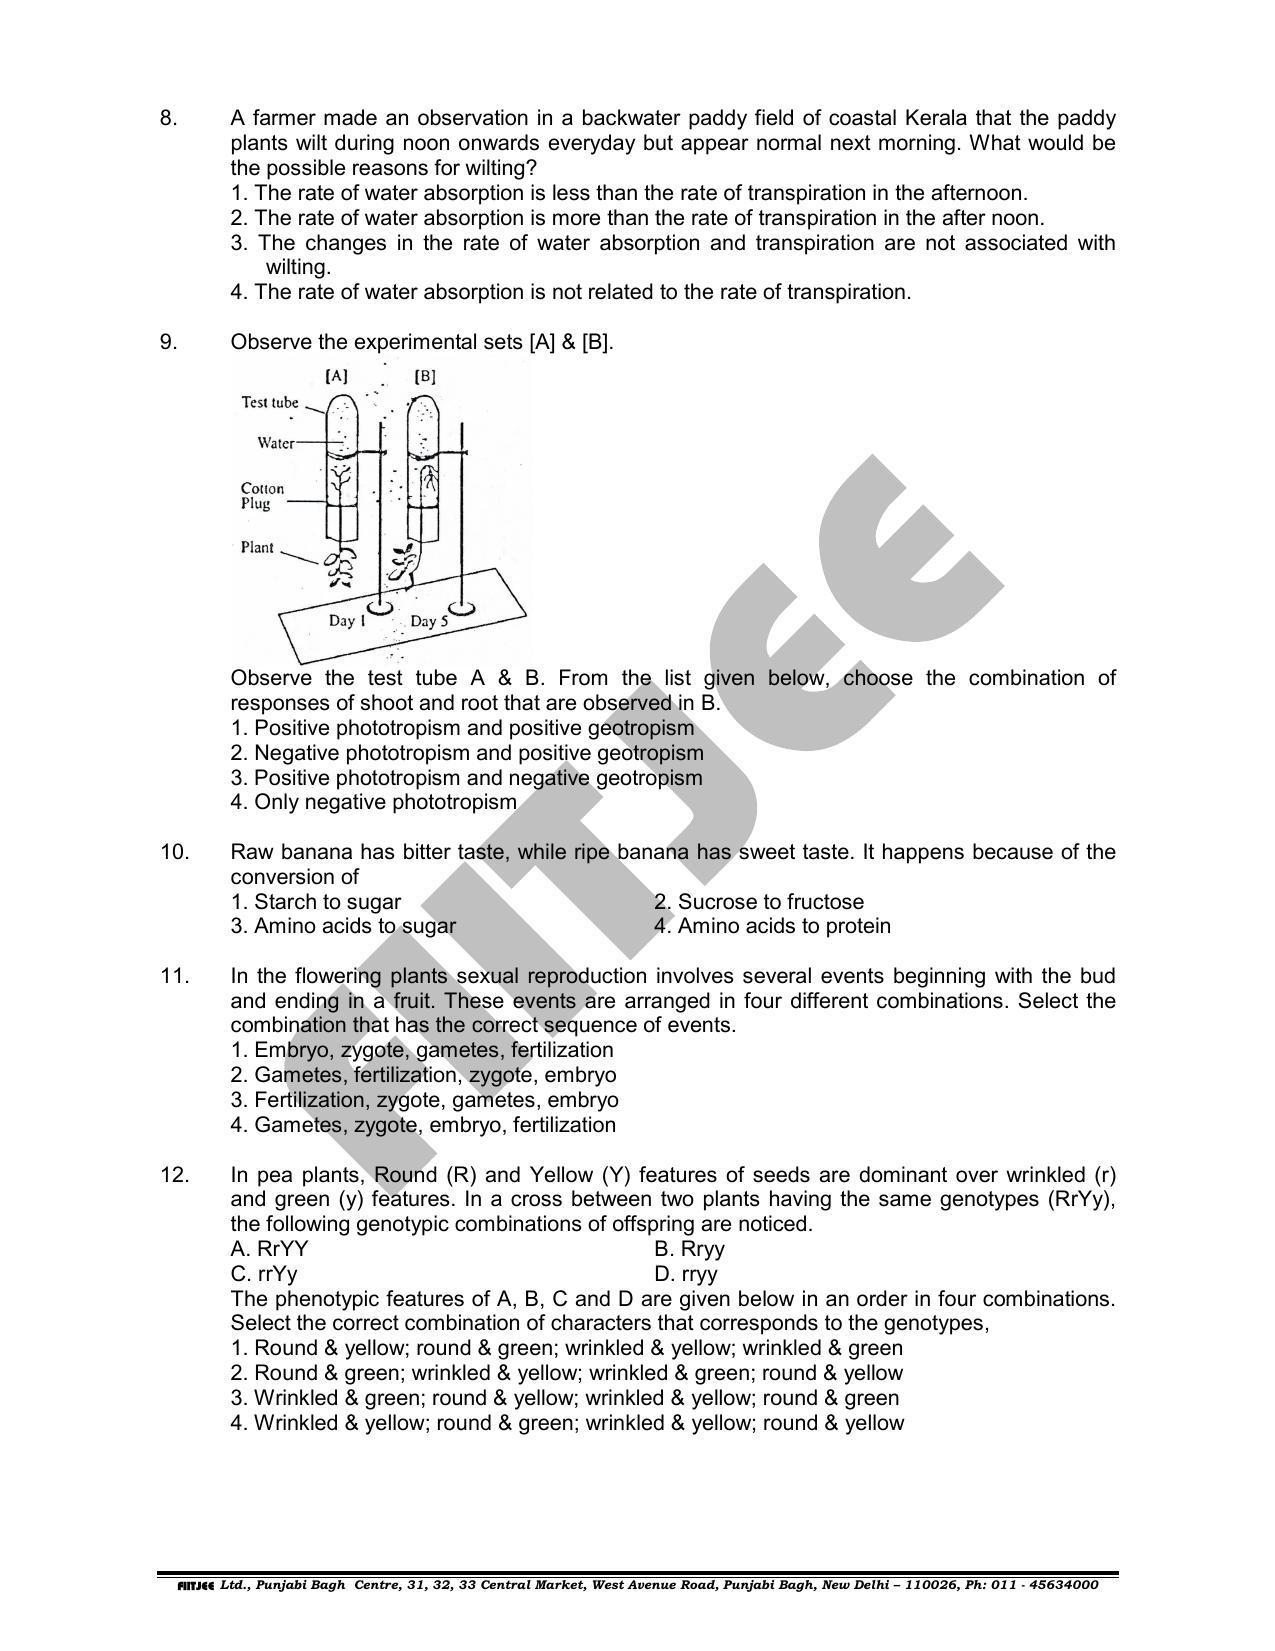 NTSE 2018 (Stage II) SAT Question Paper (May 13, 2018) - Page 2